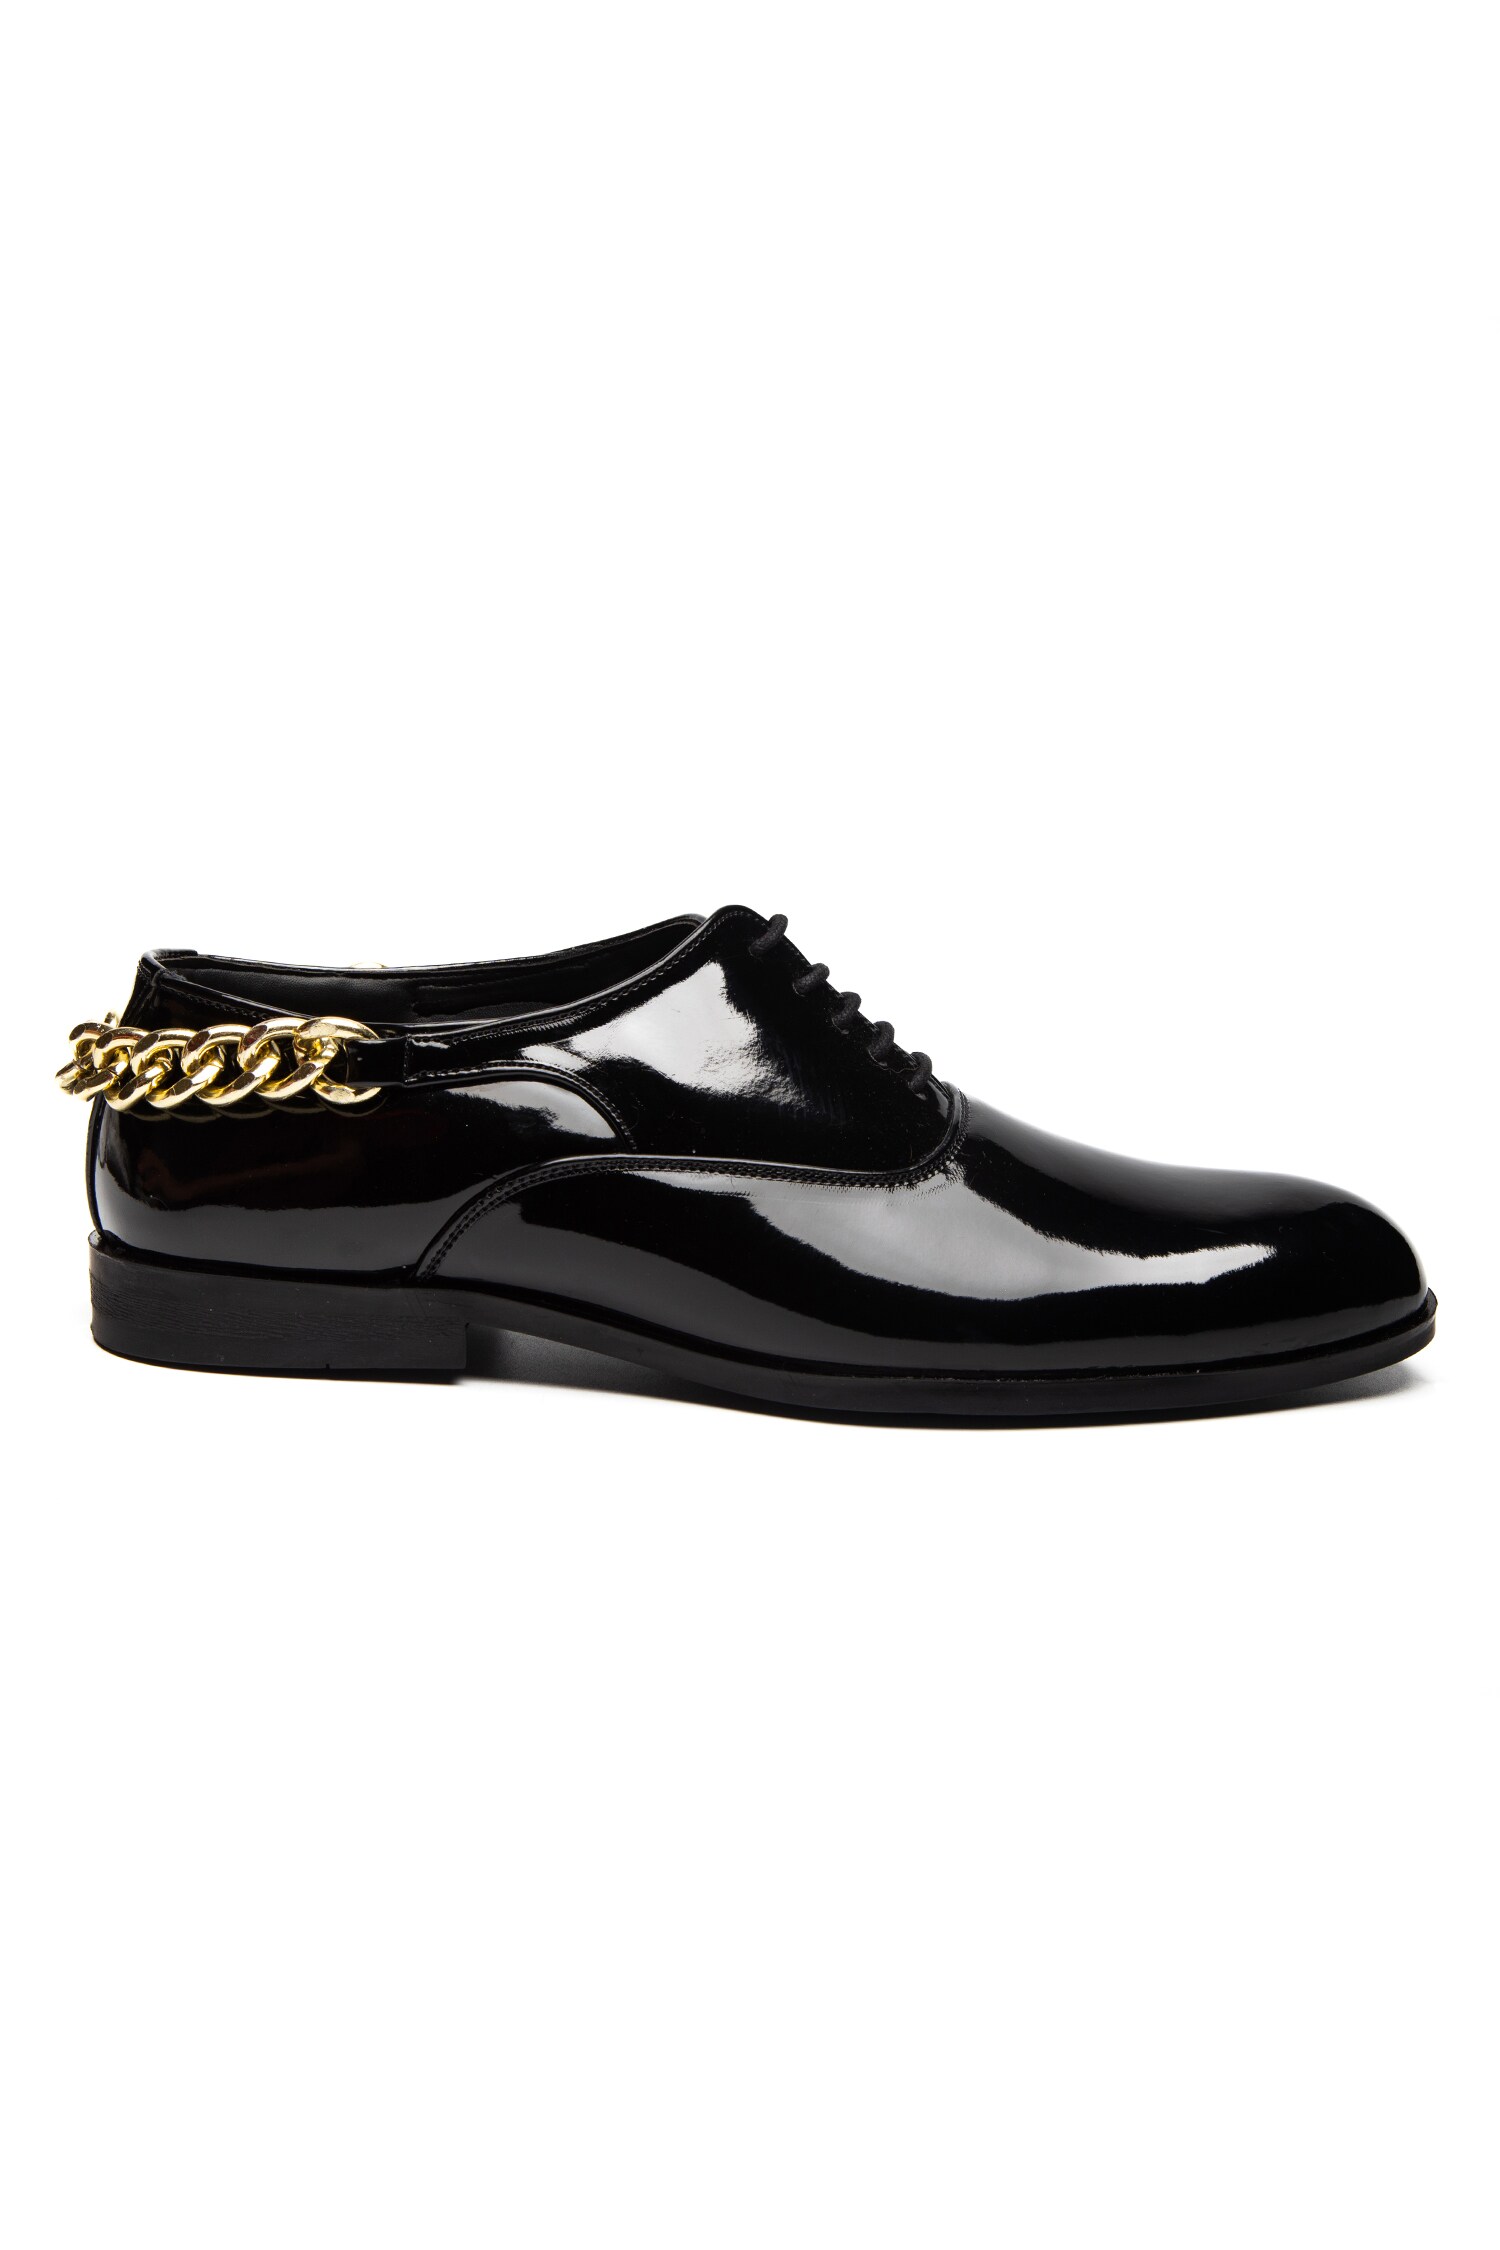 Patent Black Combo Oxford Leather Lace-Up Shoes and Gunmetal Buckle Be